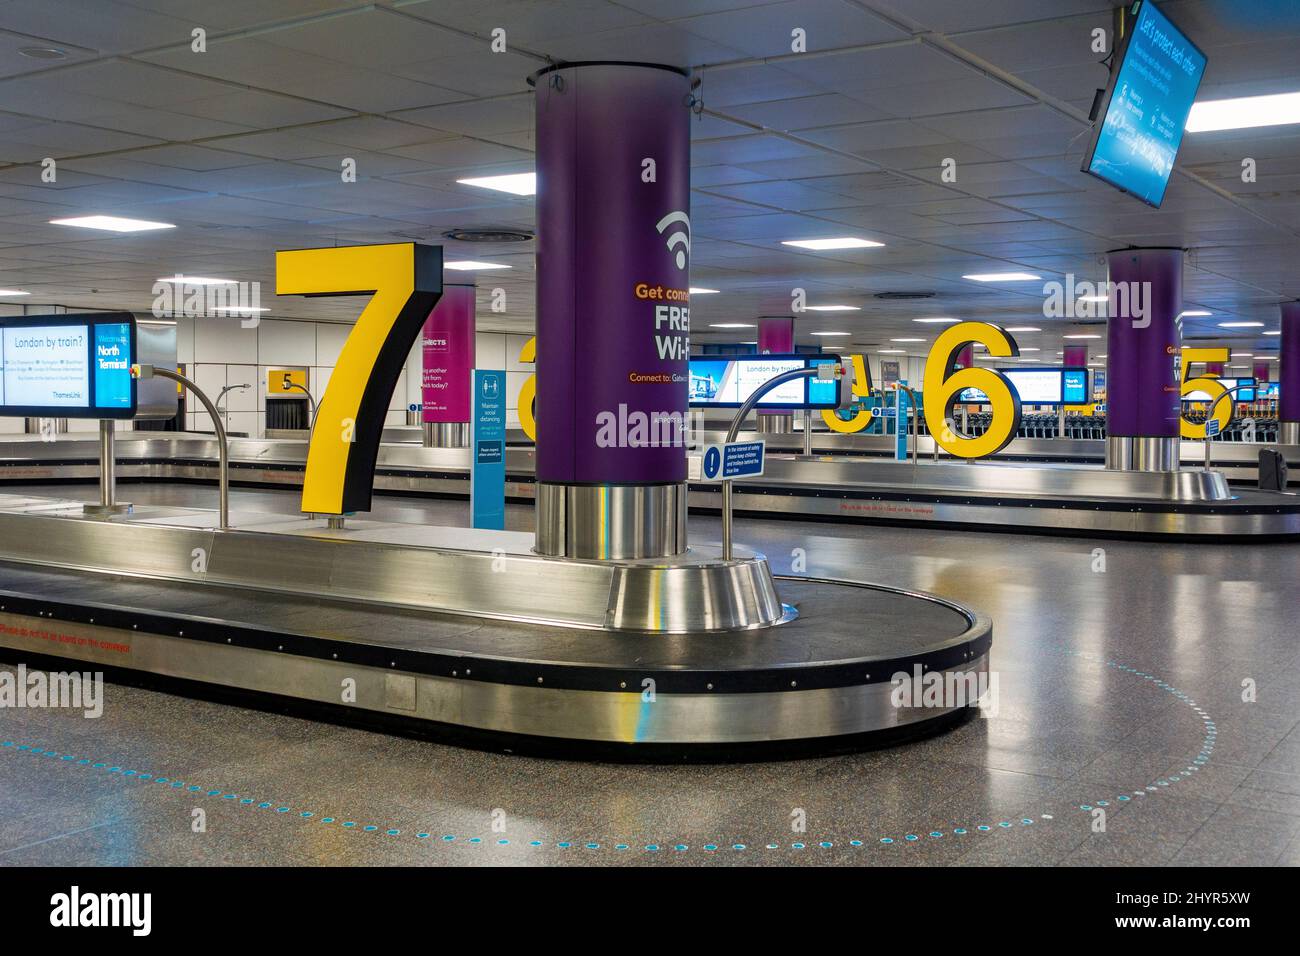 Colourful and modern airport baggage carousel showing no people or luggage Stock Photo